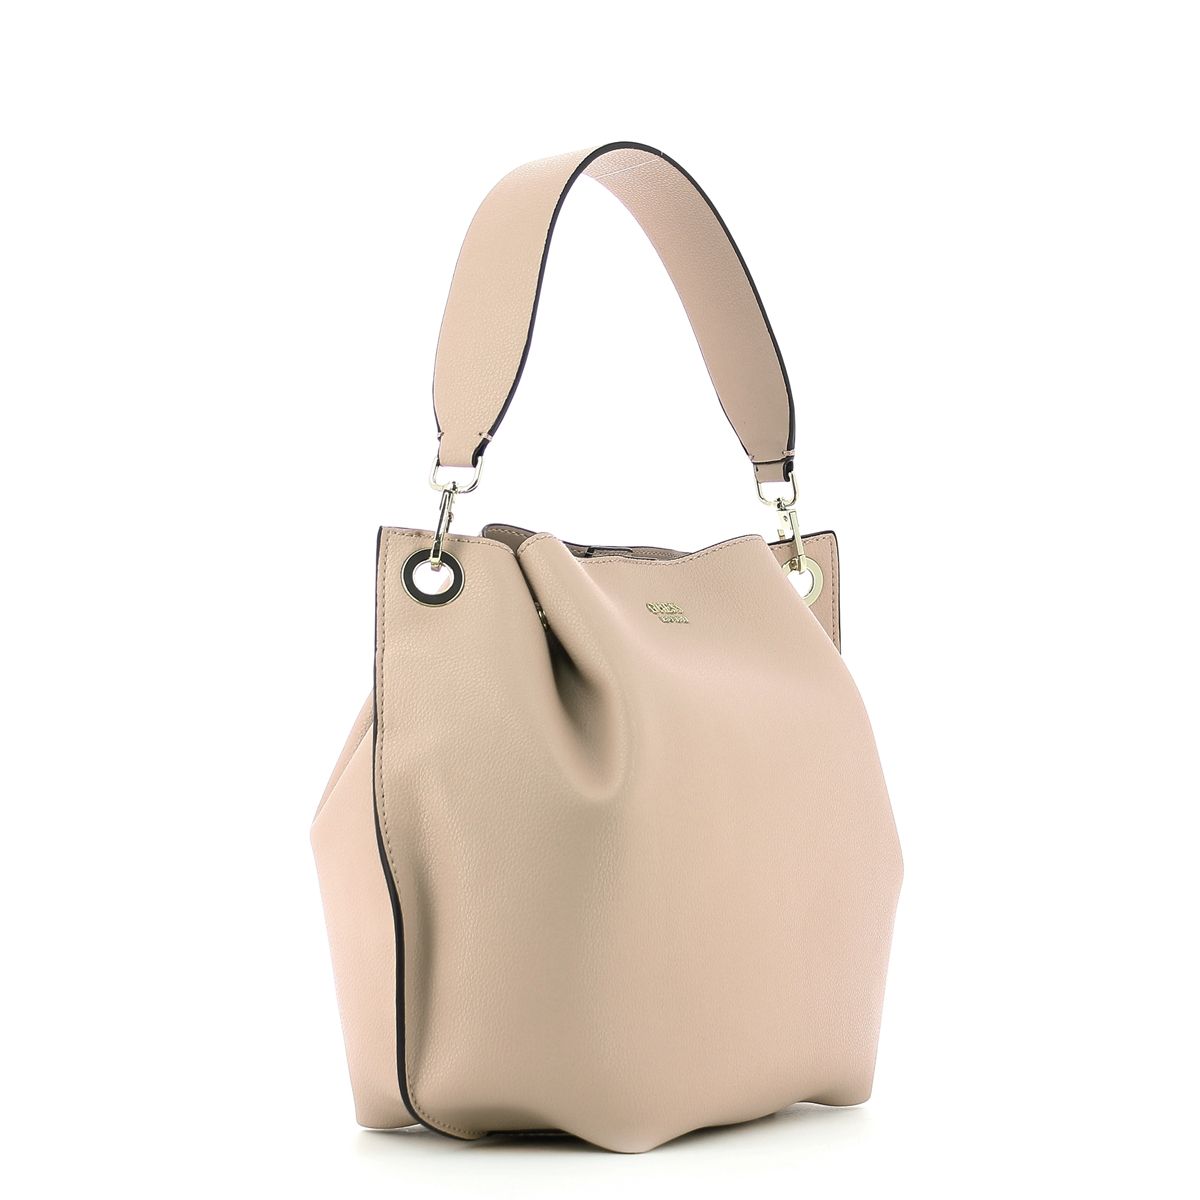 Hobo Bag Digital with crossbody Guess, chic shoulderbag in soft faux leather with two unlined compartments divided by large middle zipped compartment. With magnetic closure.